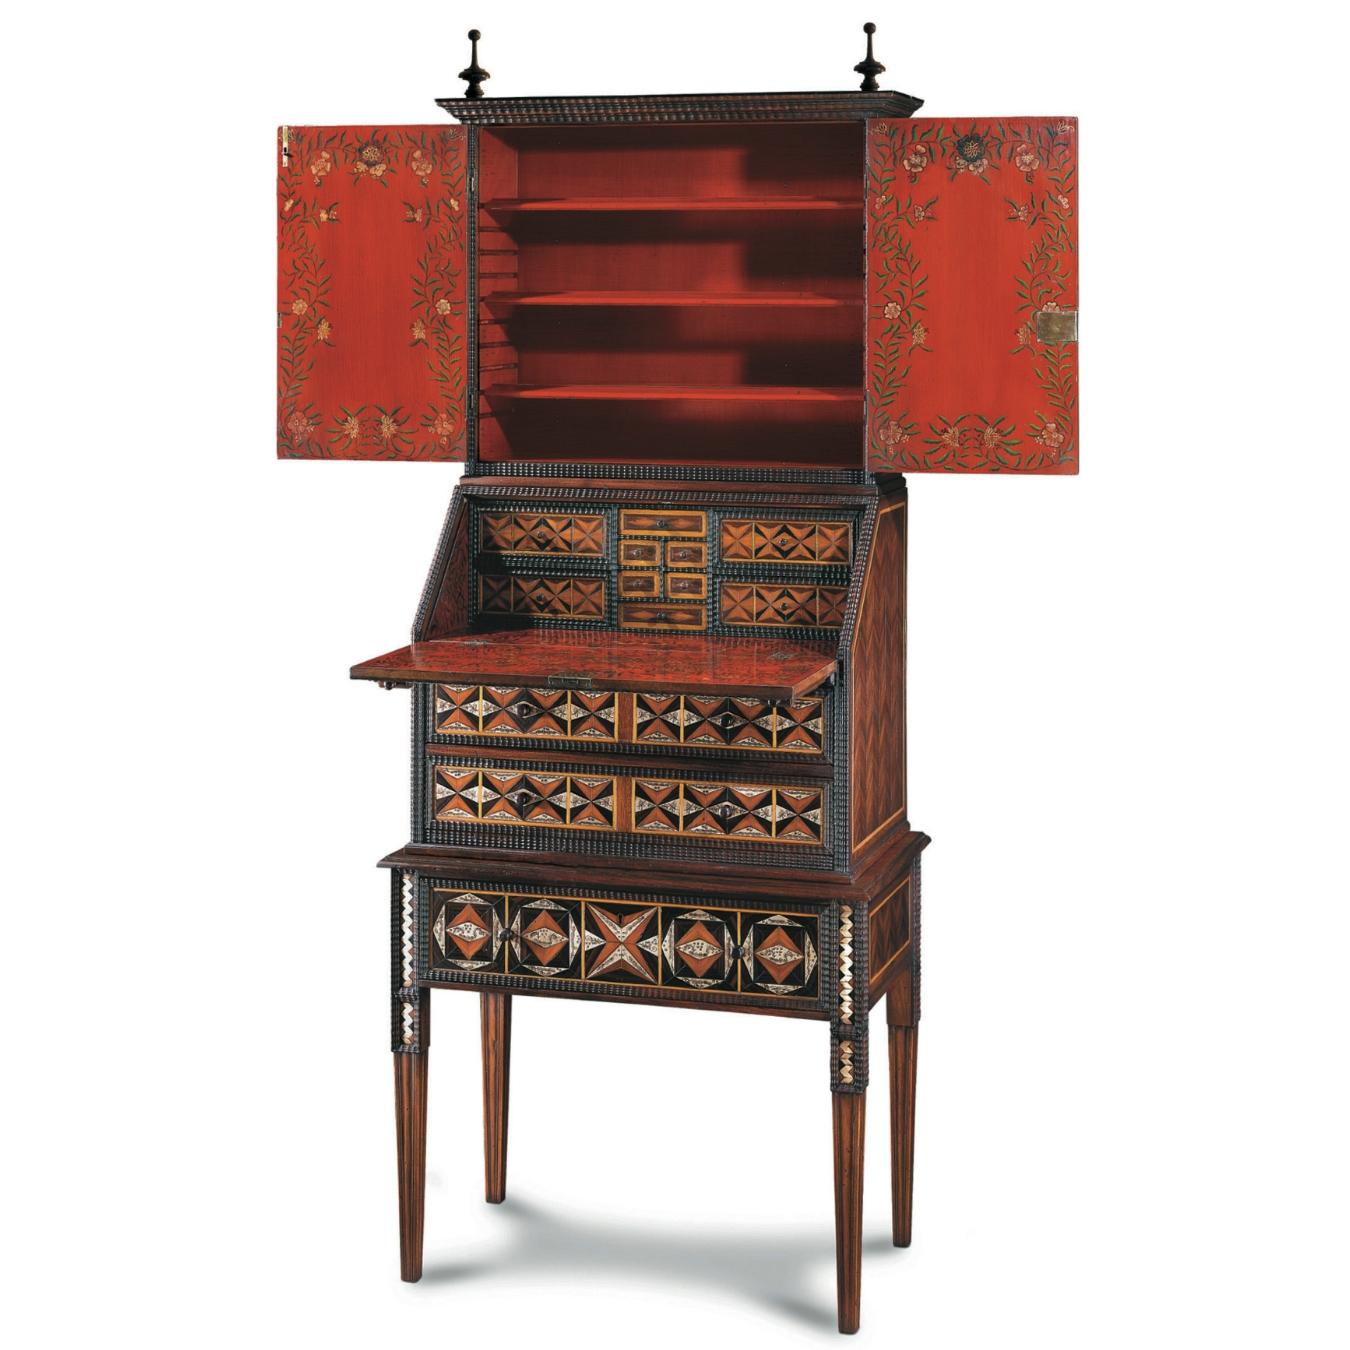 The Poblano secretaire has Indo-Portuguese, as well as colonial Mexican influences. The piece is adapted to fit the modern needs of home spaces while conserving its original essence. Its geometric veneer design immediately draws your attention to